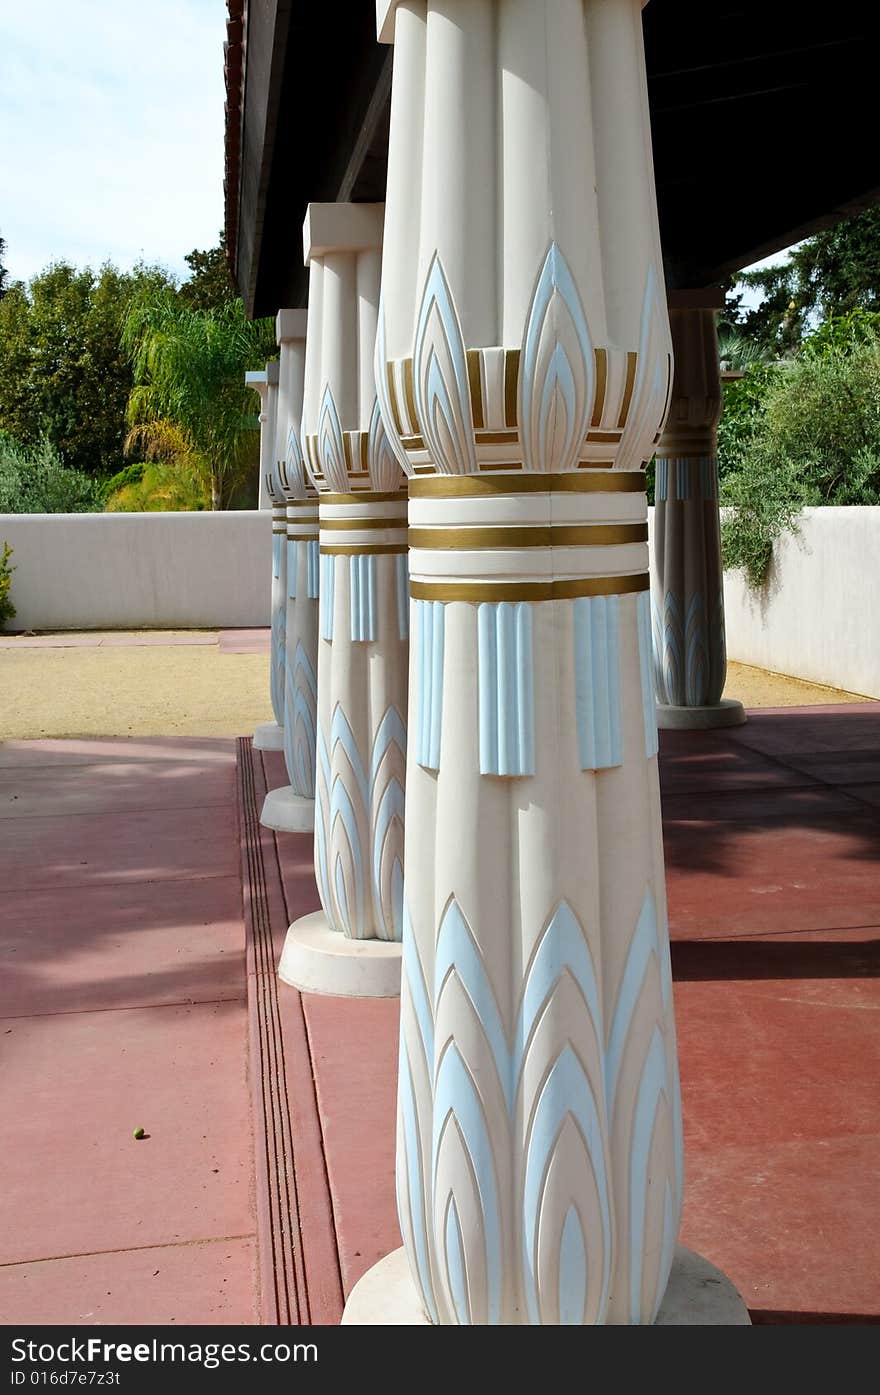 Replica of ancient Egyptian architecture column perspective